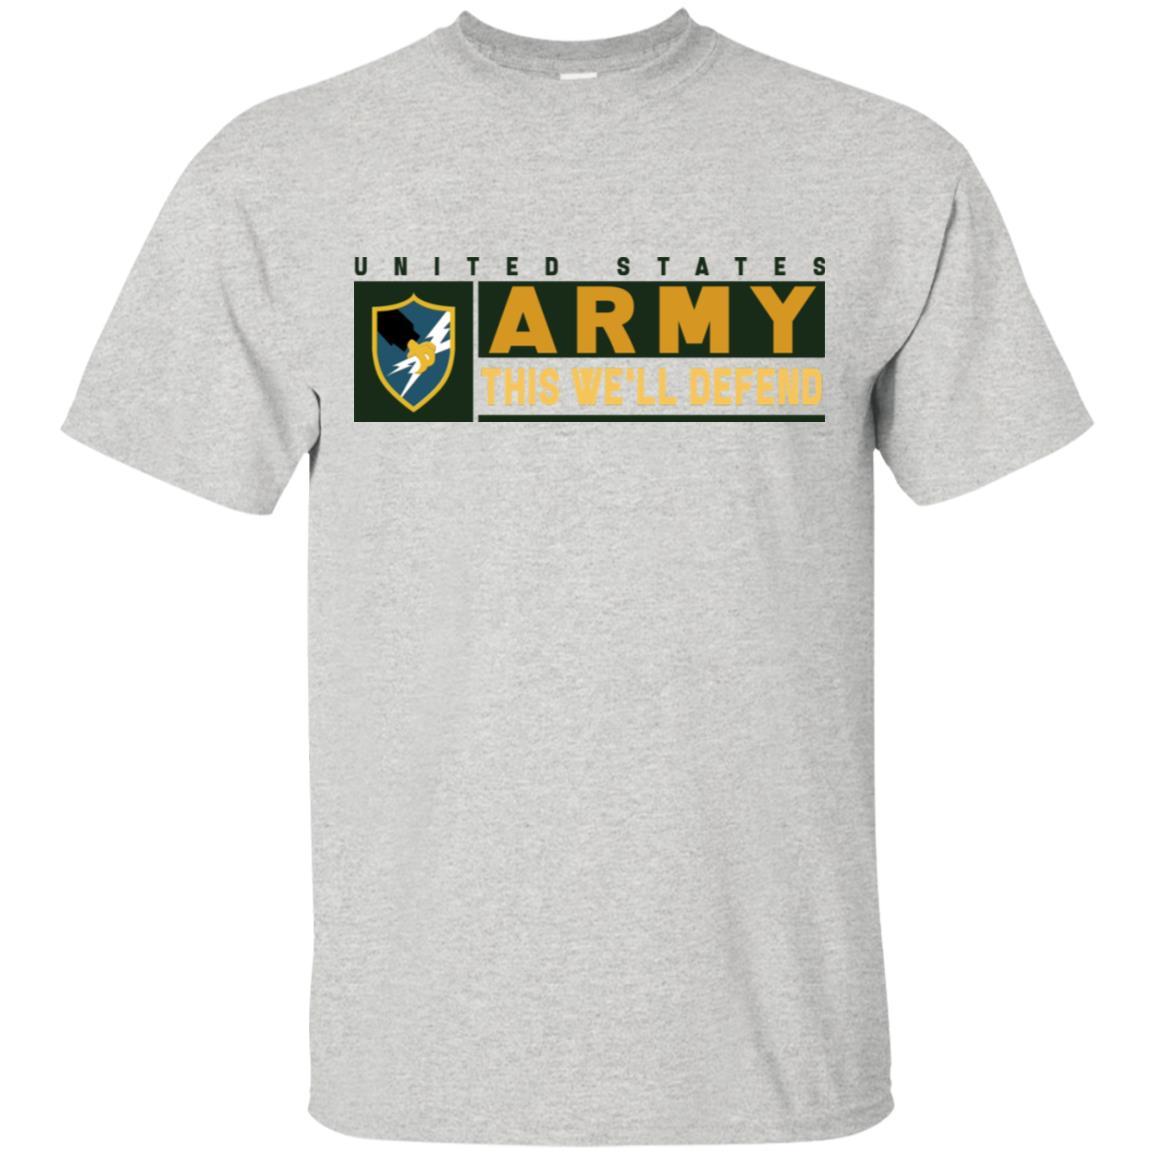 US Army Security Agency- This We'll Defend T-Shirt On Front For Men-TShirt-Army-Veterans Nation